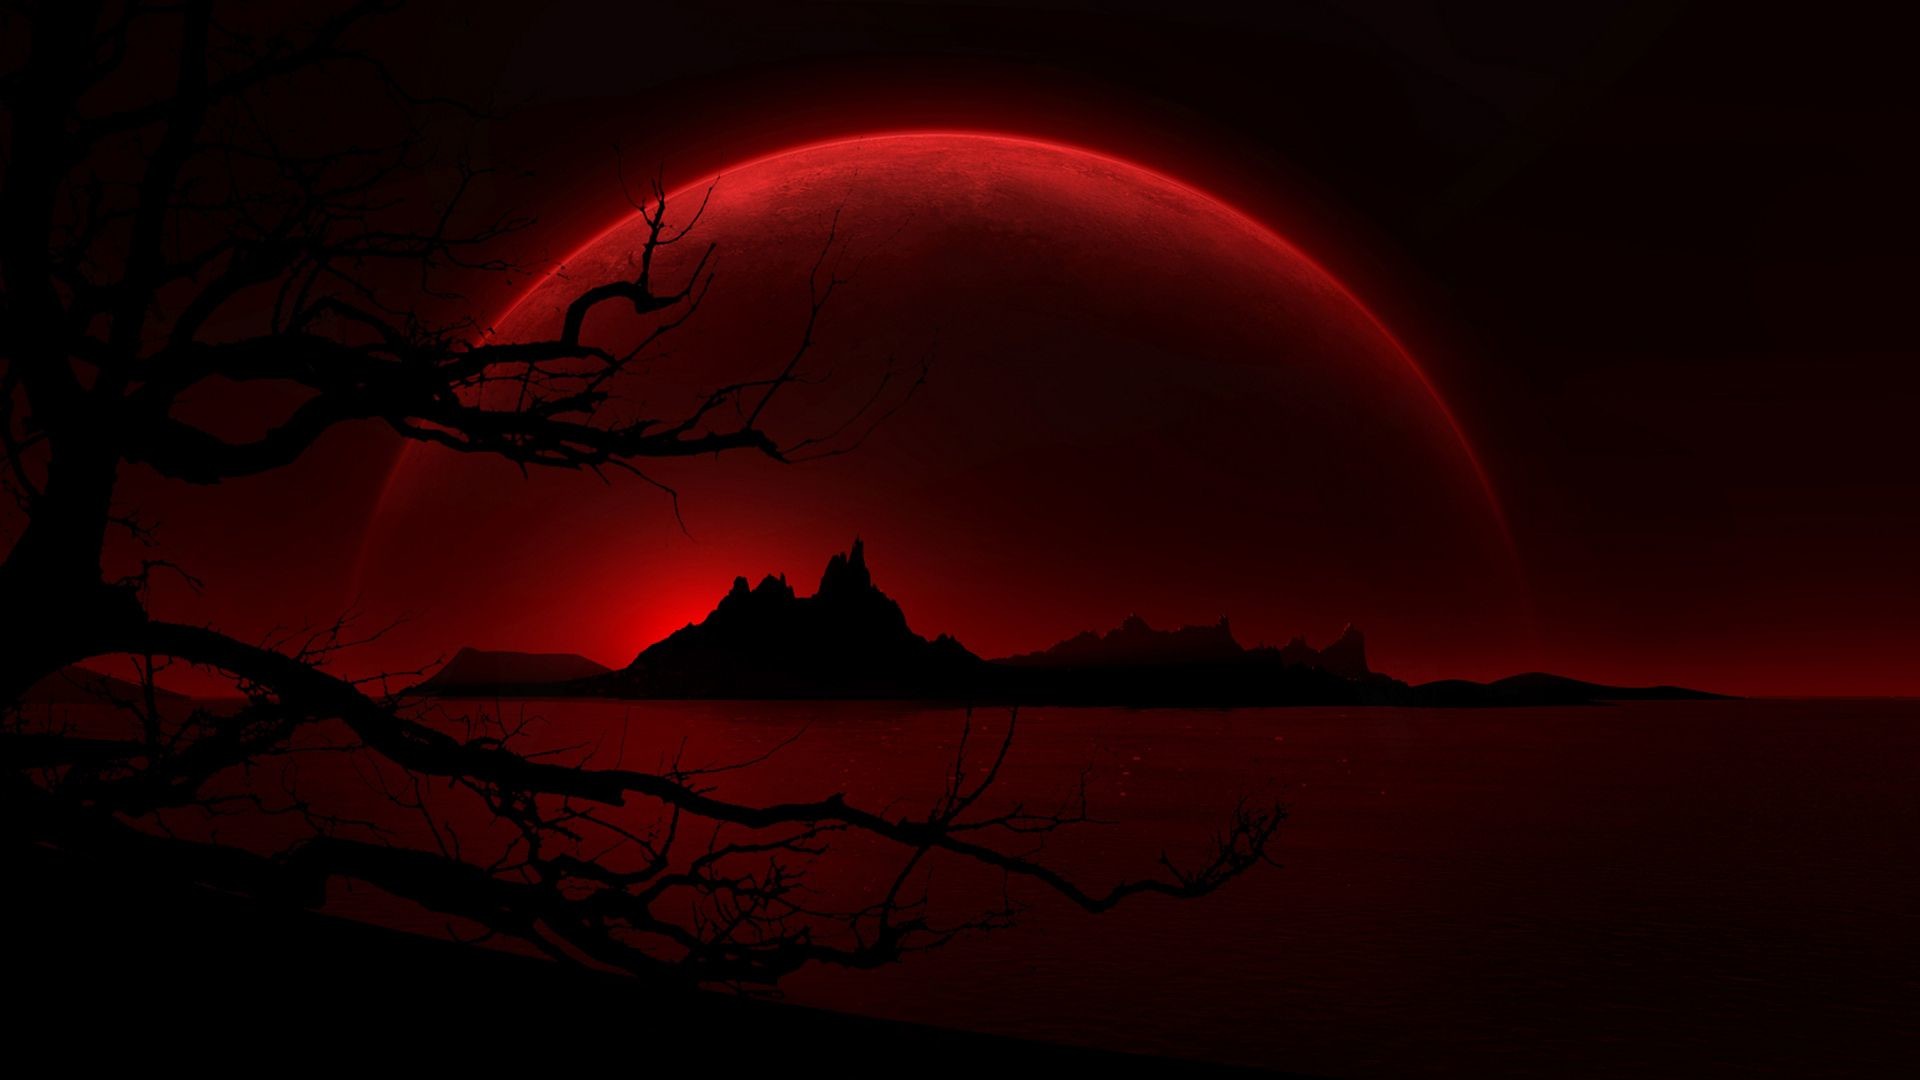 1920x1080 Red And Black Desktop Wallpaper Full High Resolution Red And